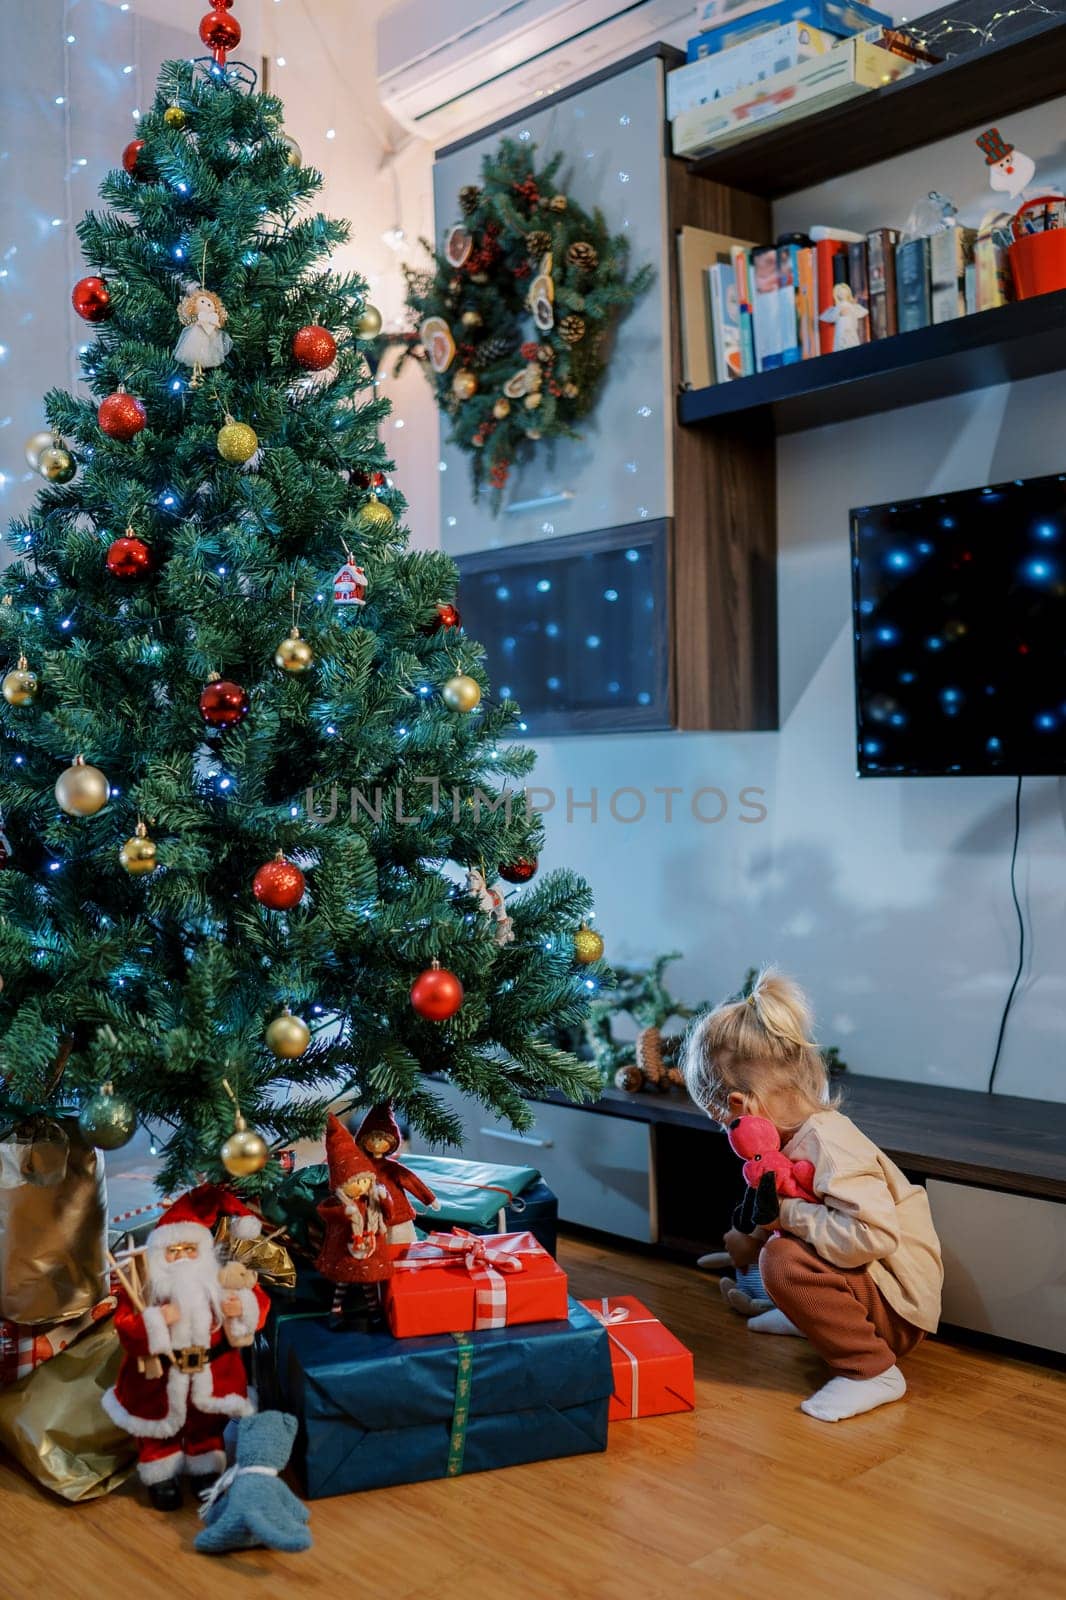 Little girl squats looking at gifts under the tree. Back view. High quality photo